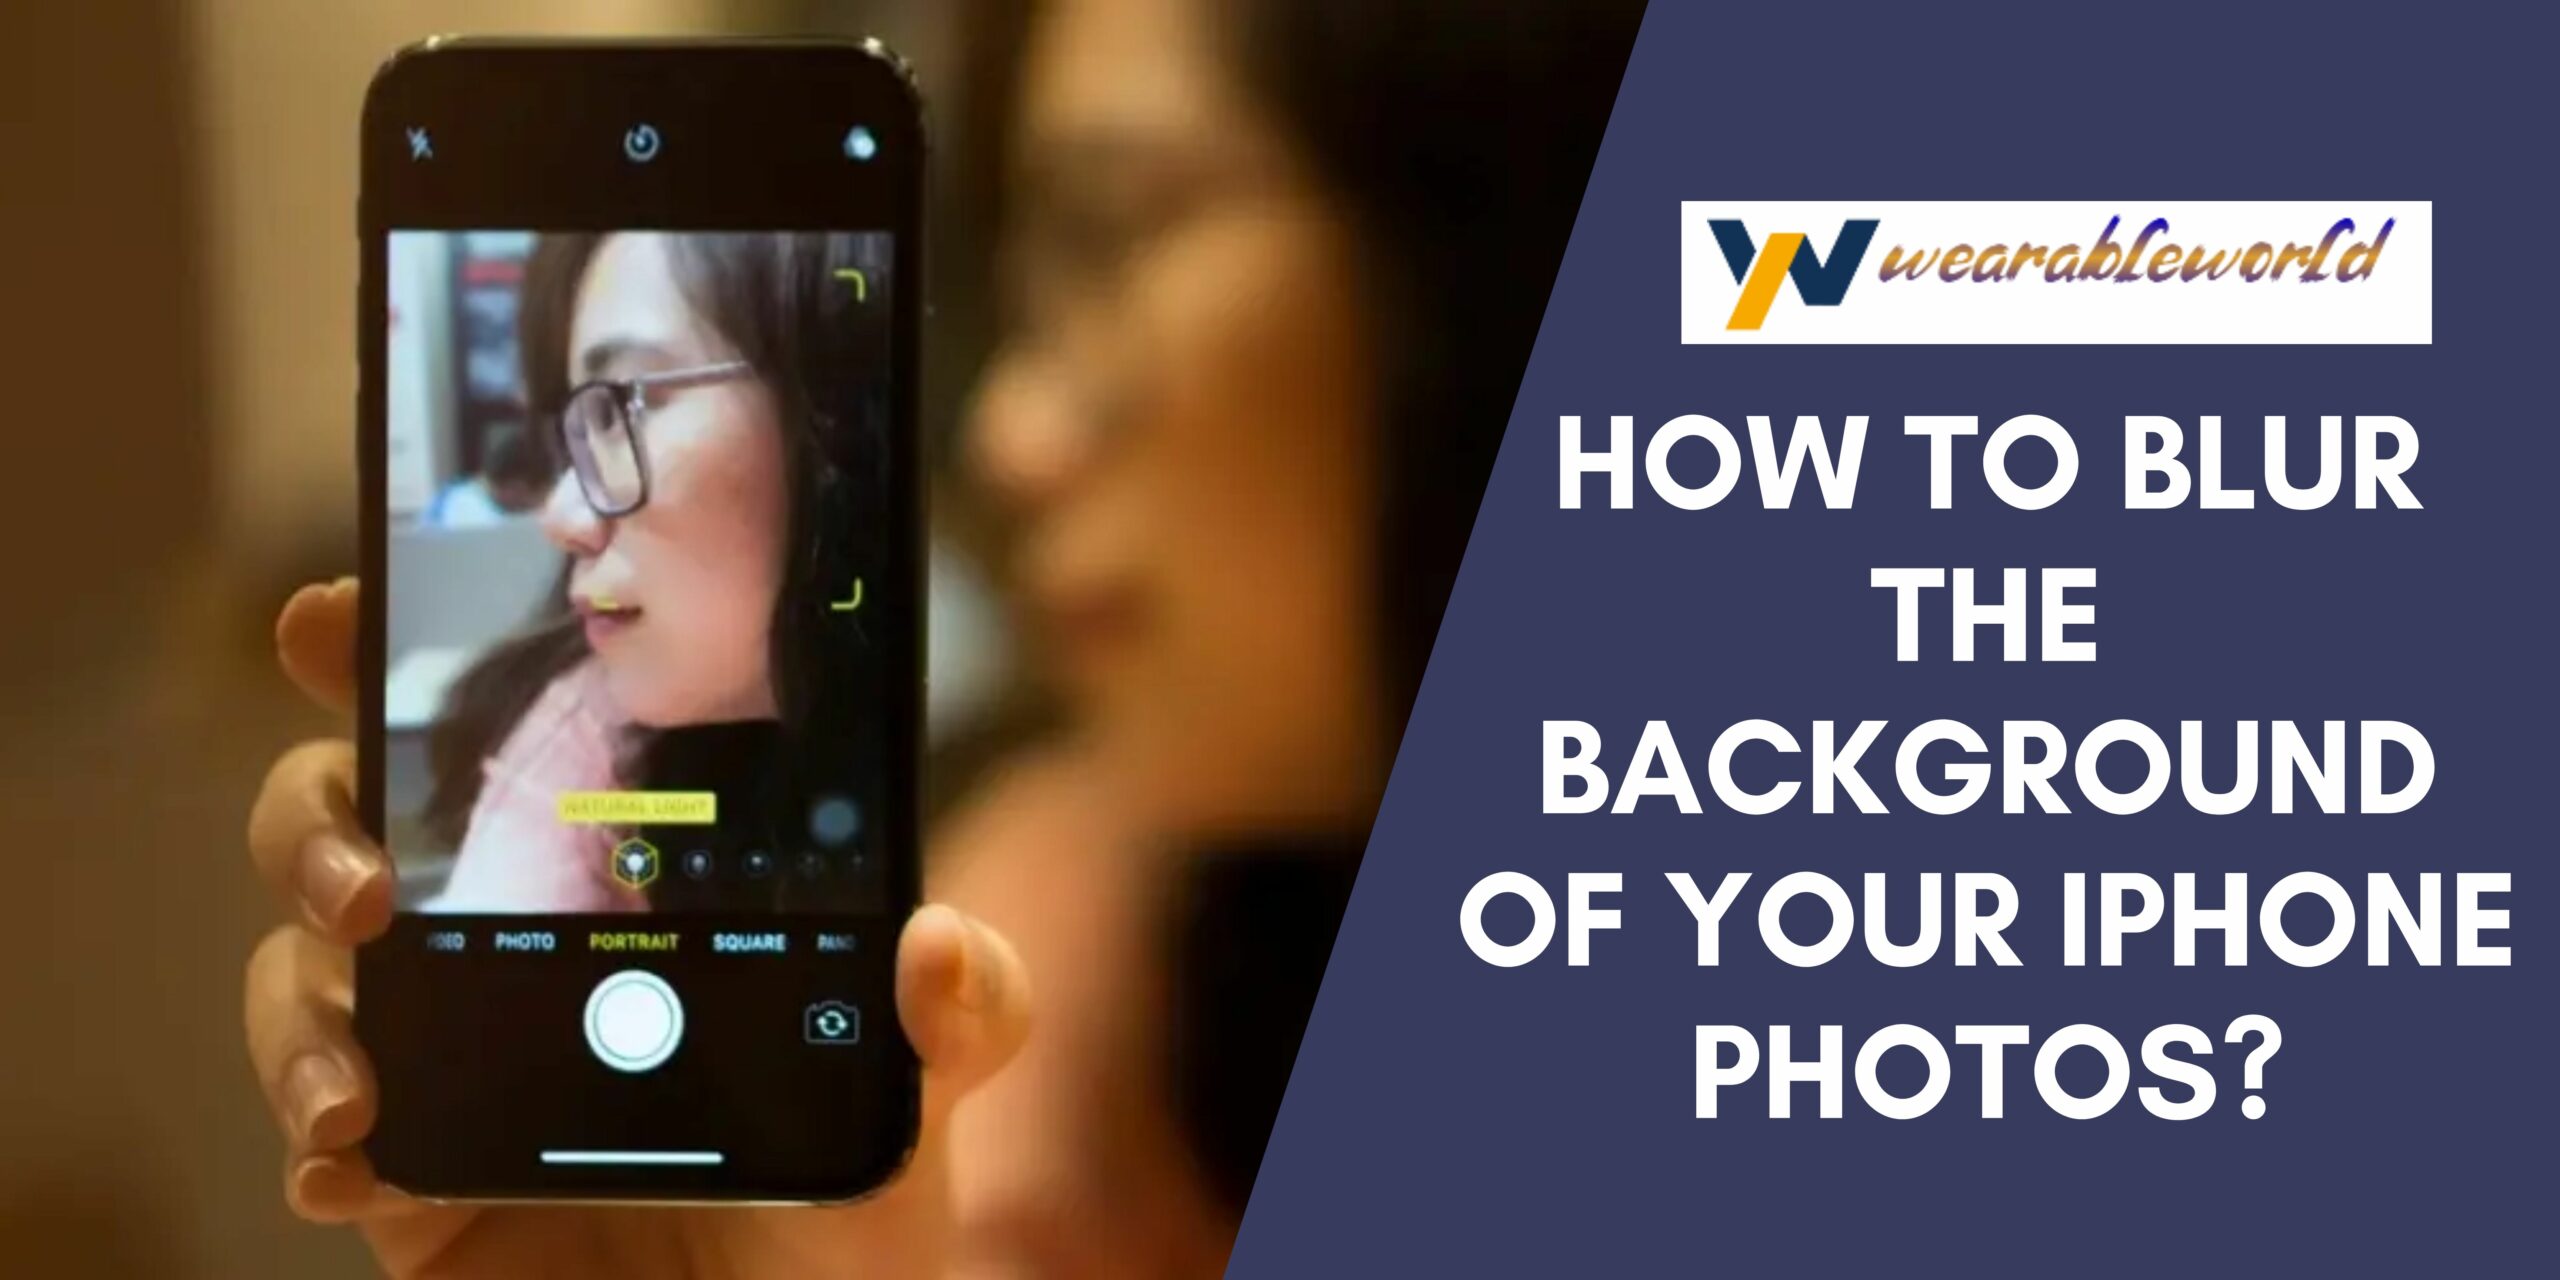 How to blur the background of your iPhone photos